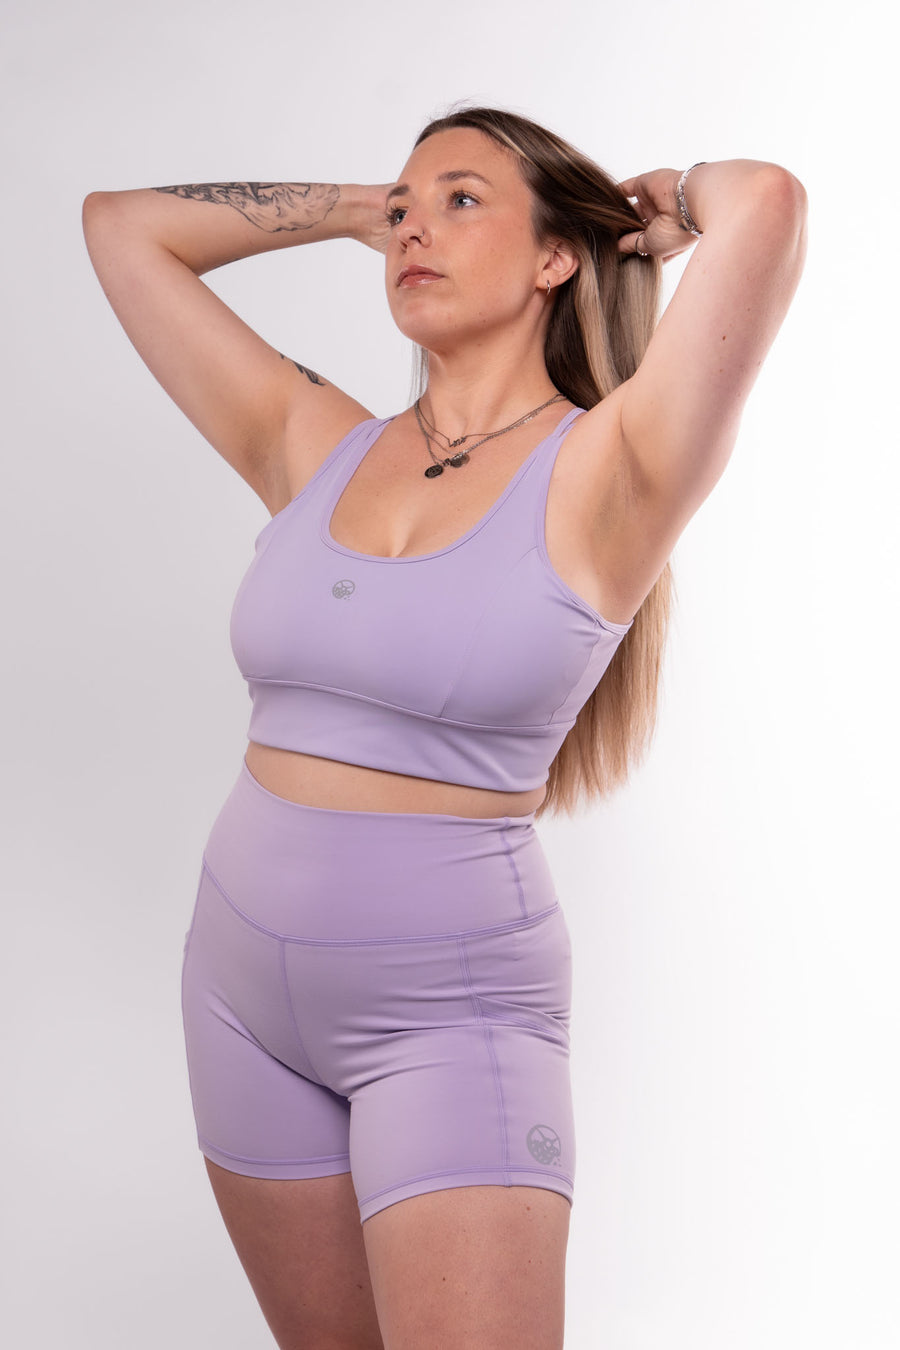 Where You Can Find Really Cute and Functional Plus Size ActiveWear!